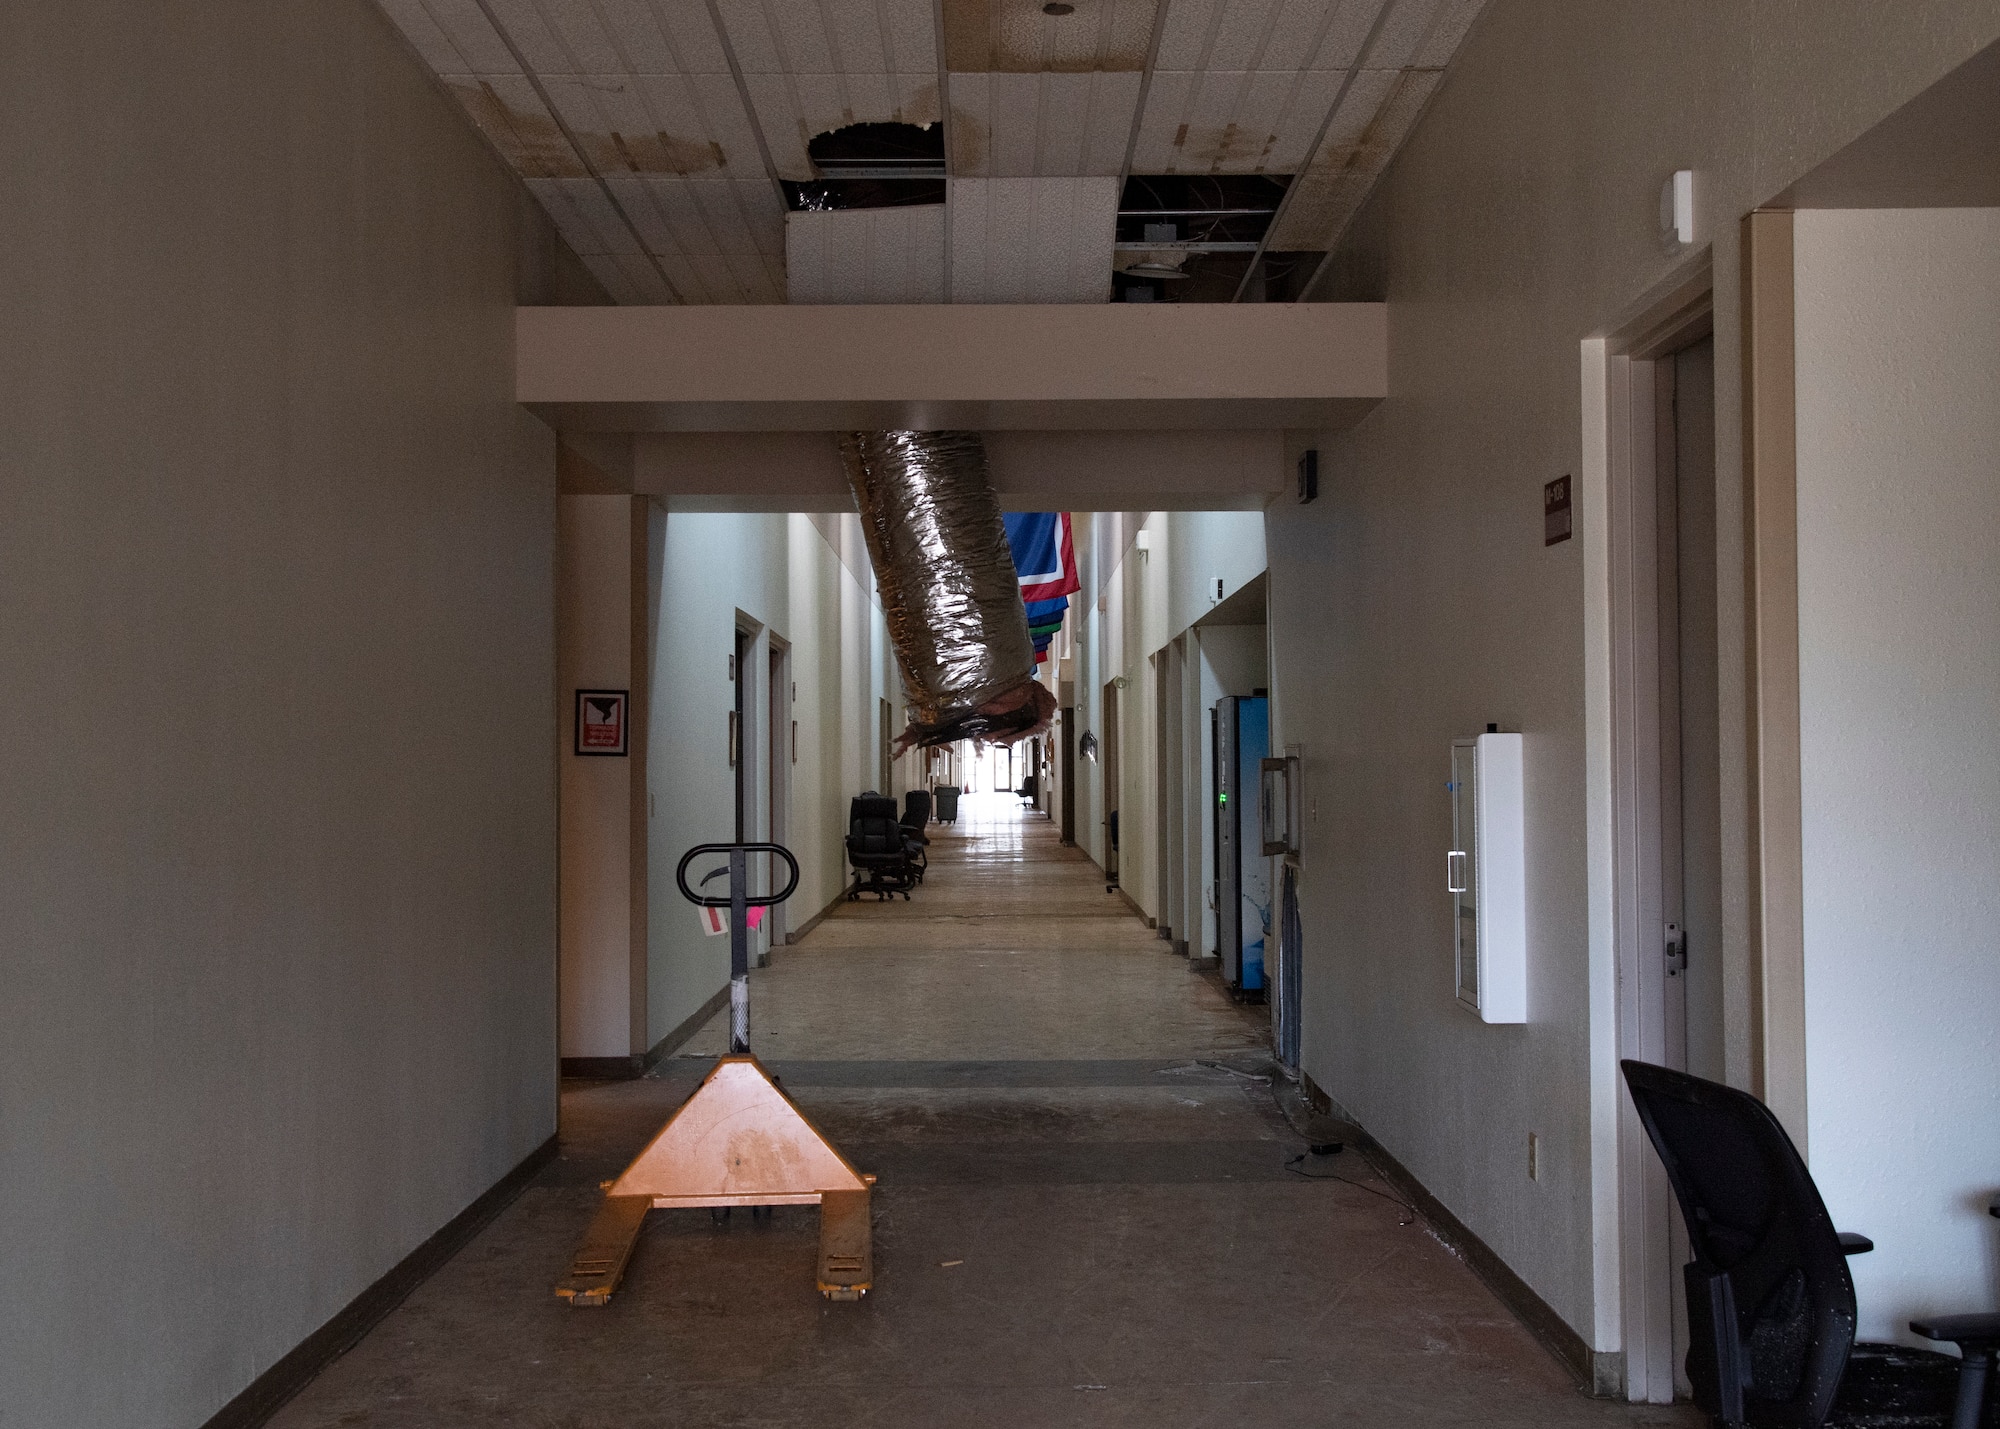 The damaged main corridor of the 361st Training Squadron's Aerospace Ground Equipment schoolhouse at Sheppard Air Force Base, Texas, March 4, 2021. The Feb. 14, 2021, snowstorm damaged the AGE schoolhouse leaving it defunct. This whole corridor was flooded and was the most damaged part of the schoolhouse. (U.S. Air Force photo by Senior Airman Pedro Tenorio)